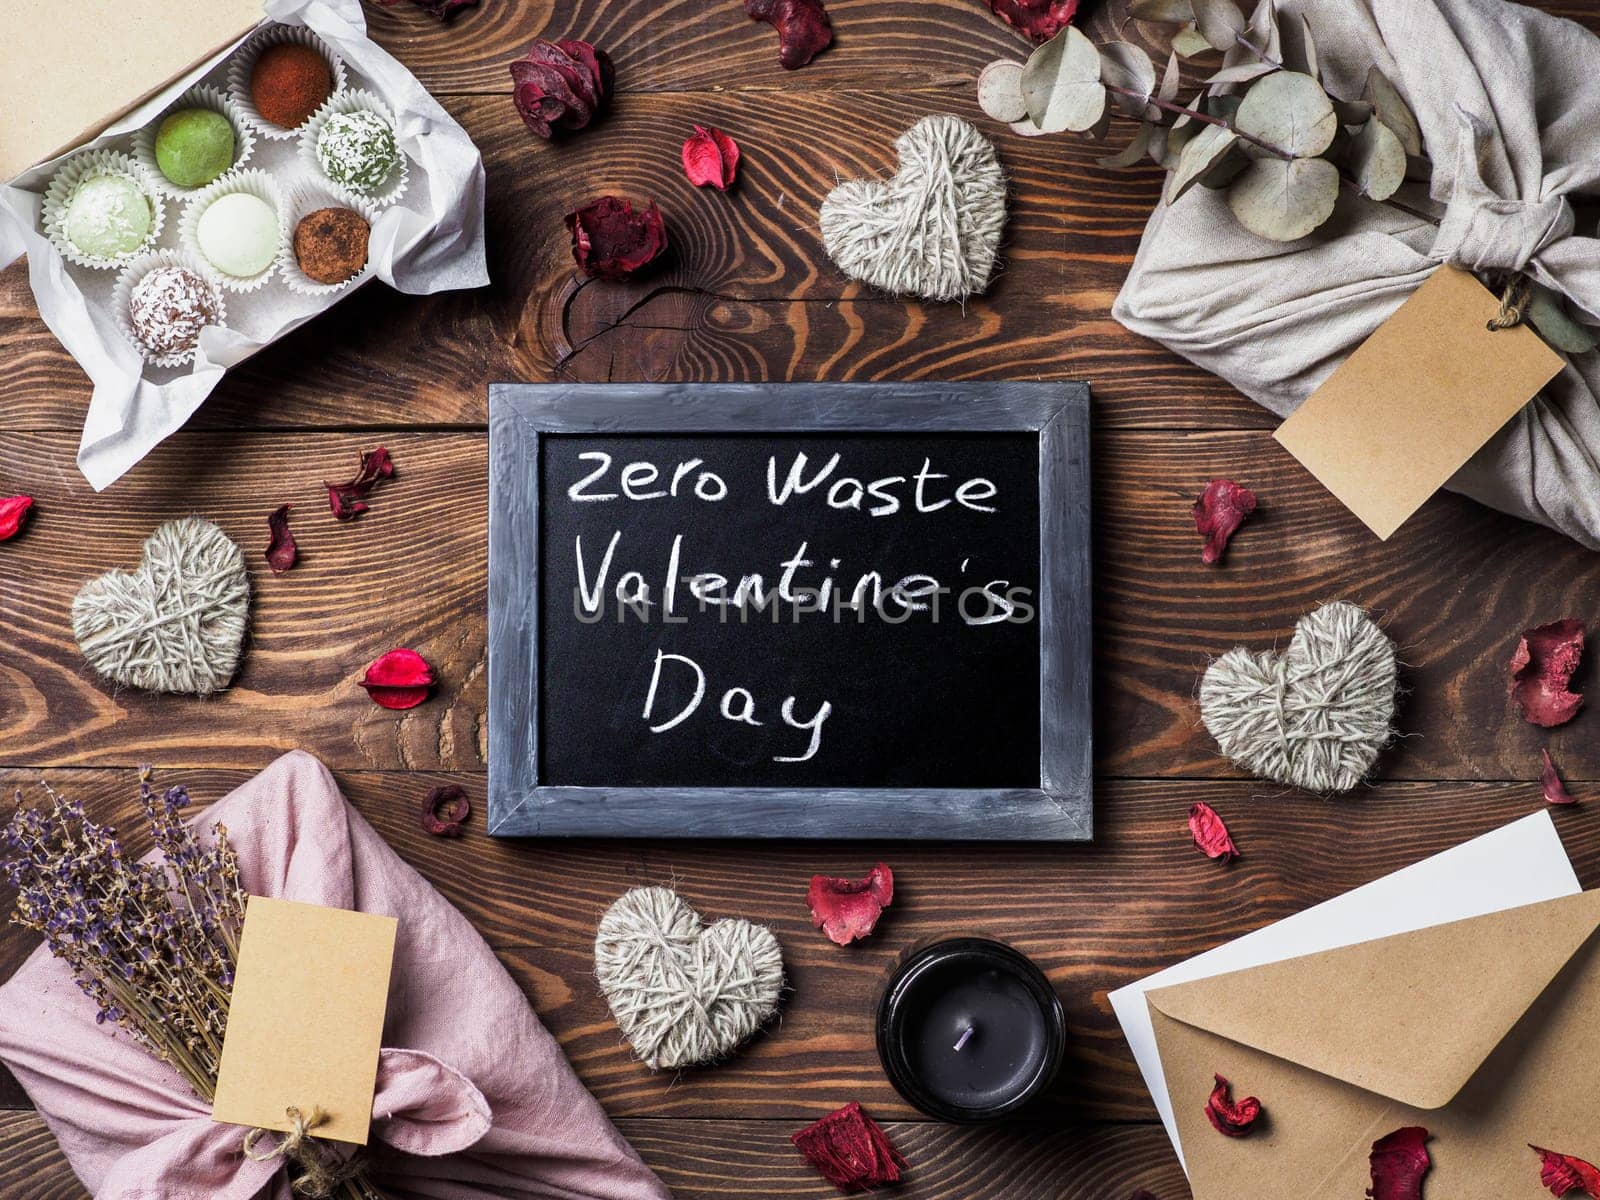 Zero waste Valentine's Day concept. Eco-friendly gift cloth wrapping in Furoshiki style, homemade sweets as gift ideas and chalkboard with Zero Waste Valentine's Day letters on brown wooden background